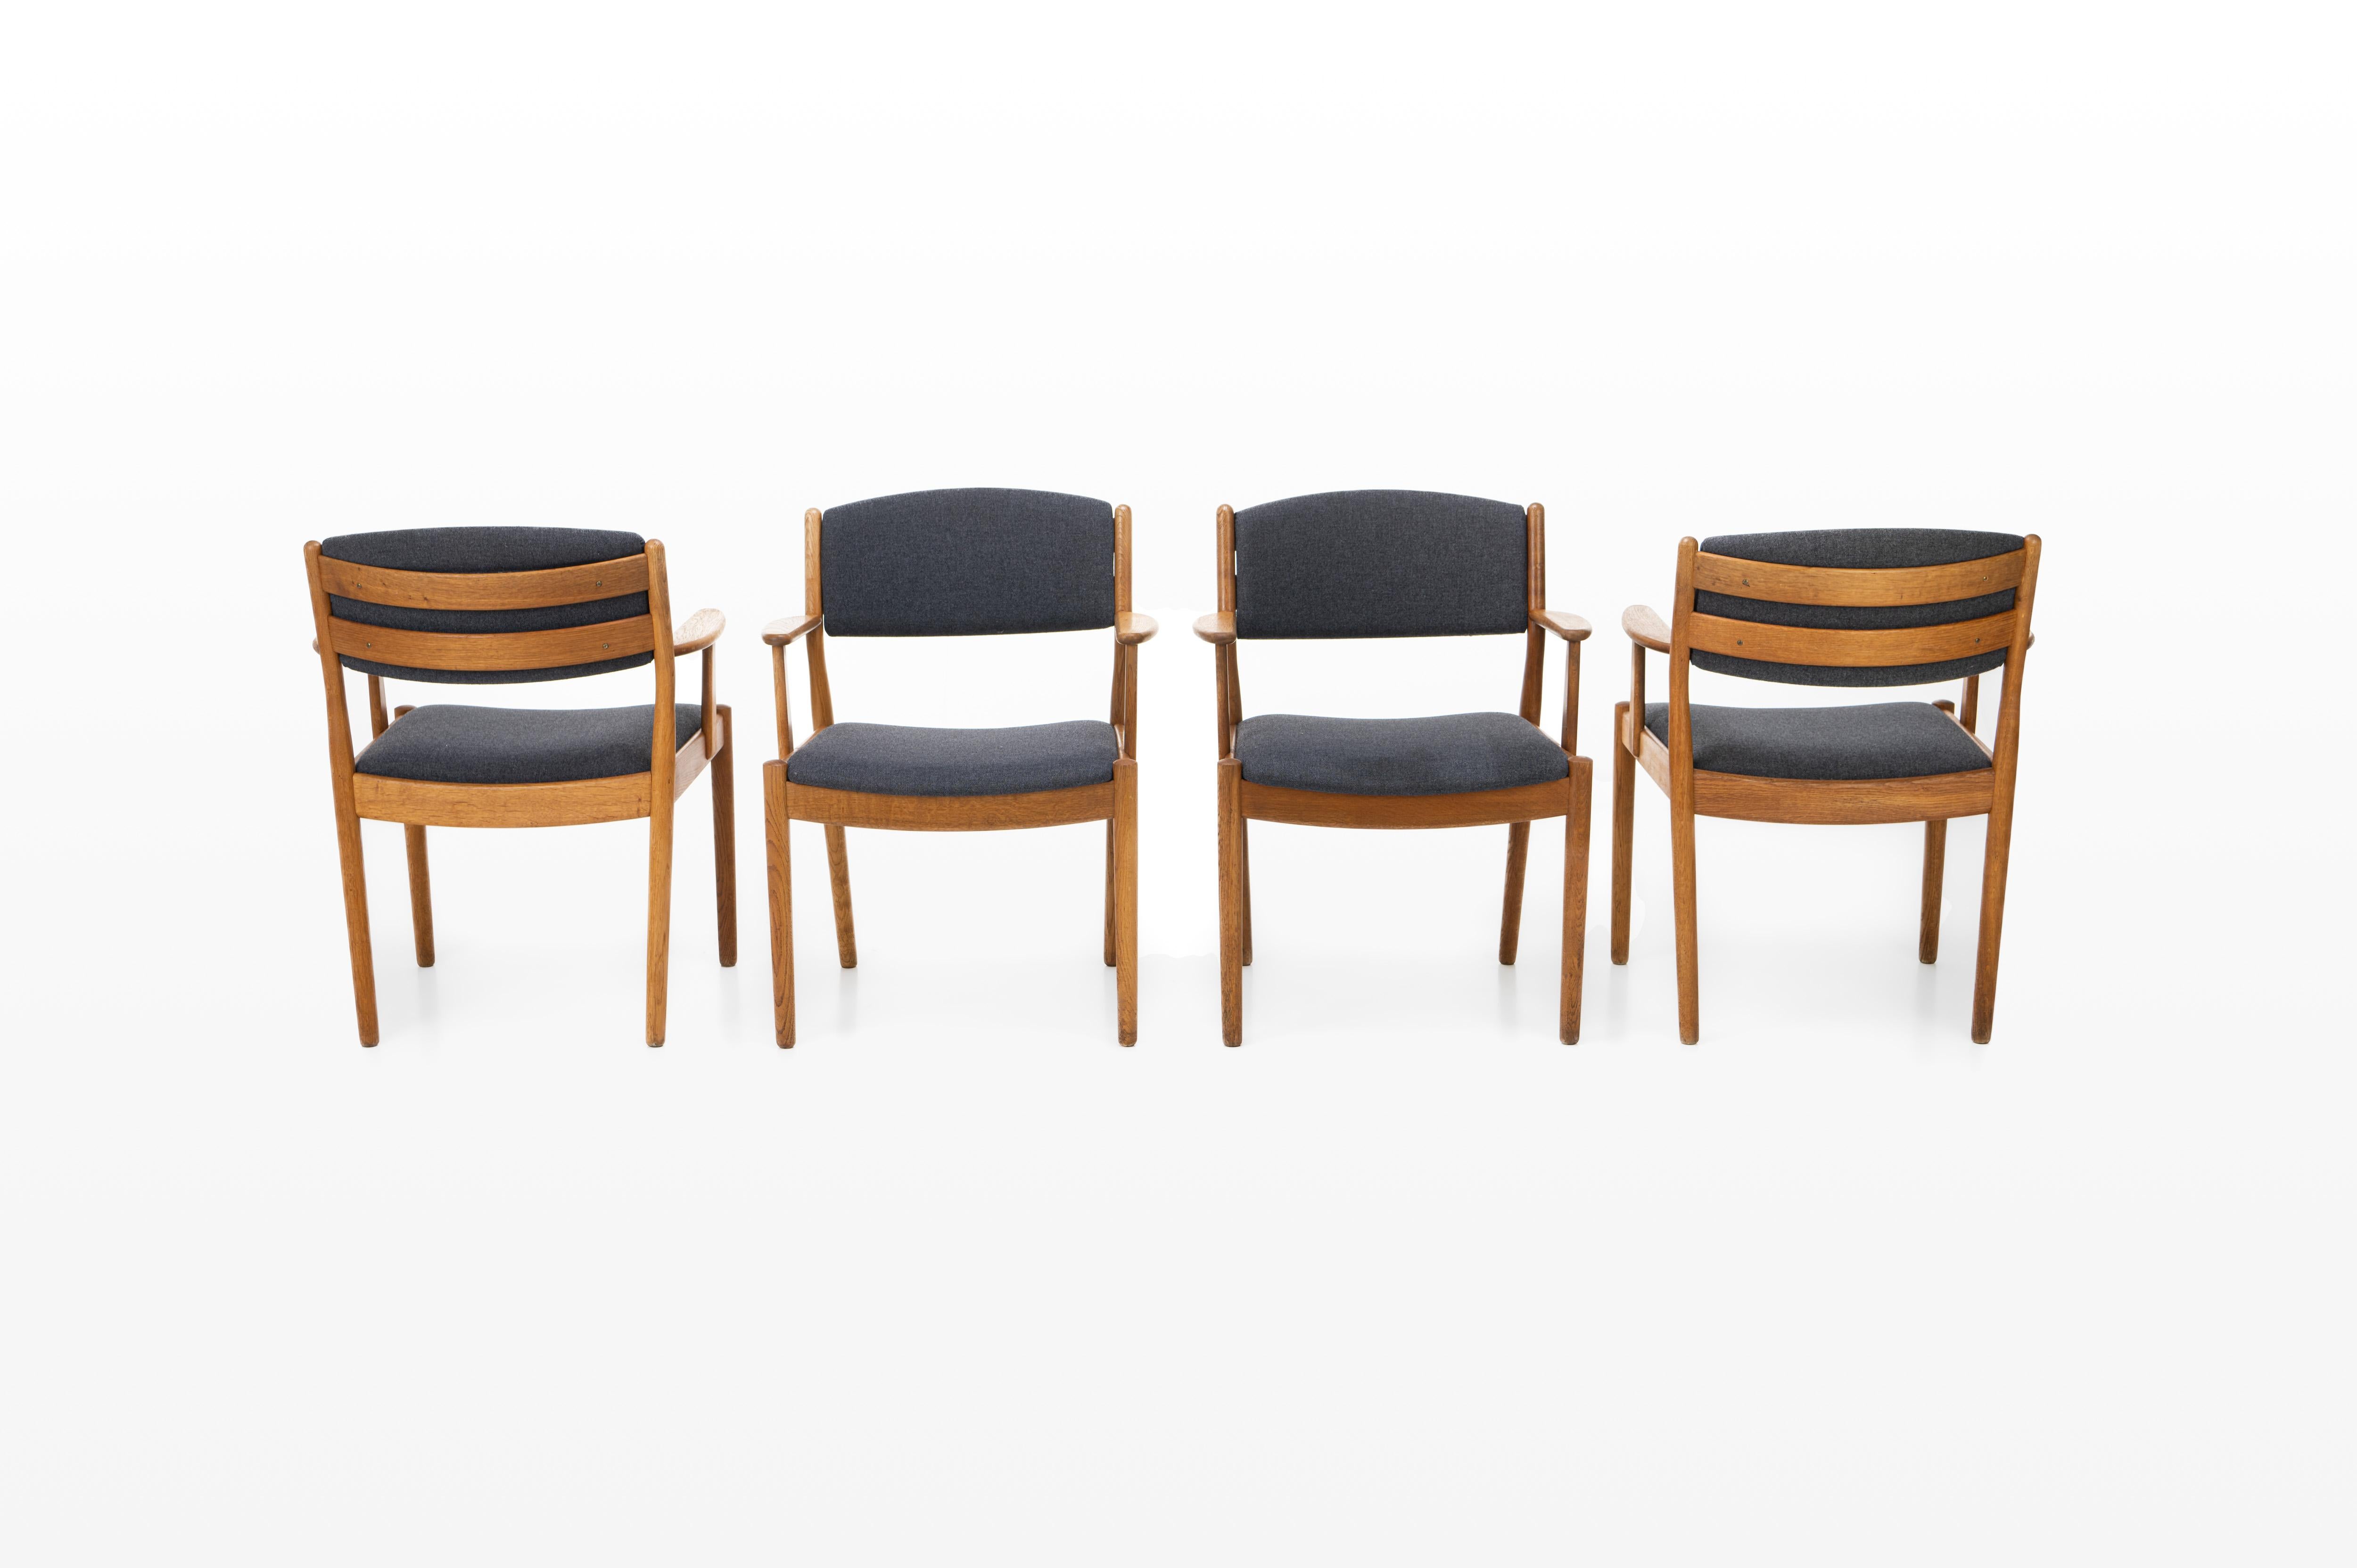 Very nice set of four vintage dining chairs with armrests designed by Poul Volther for FDB Møbler, Denmark 1960s. The chairs have an oak frame and a dark gray fabric.
